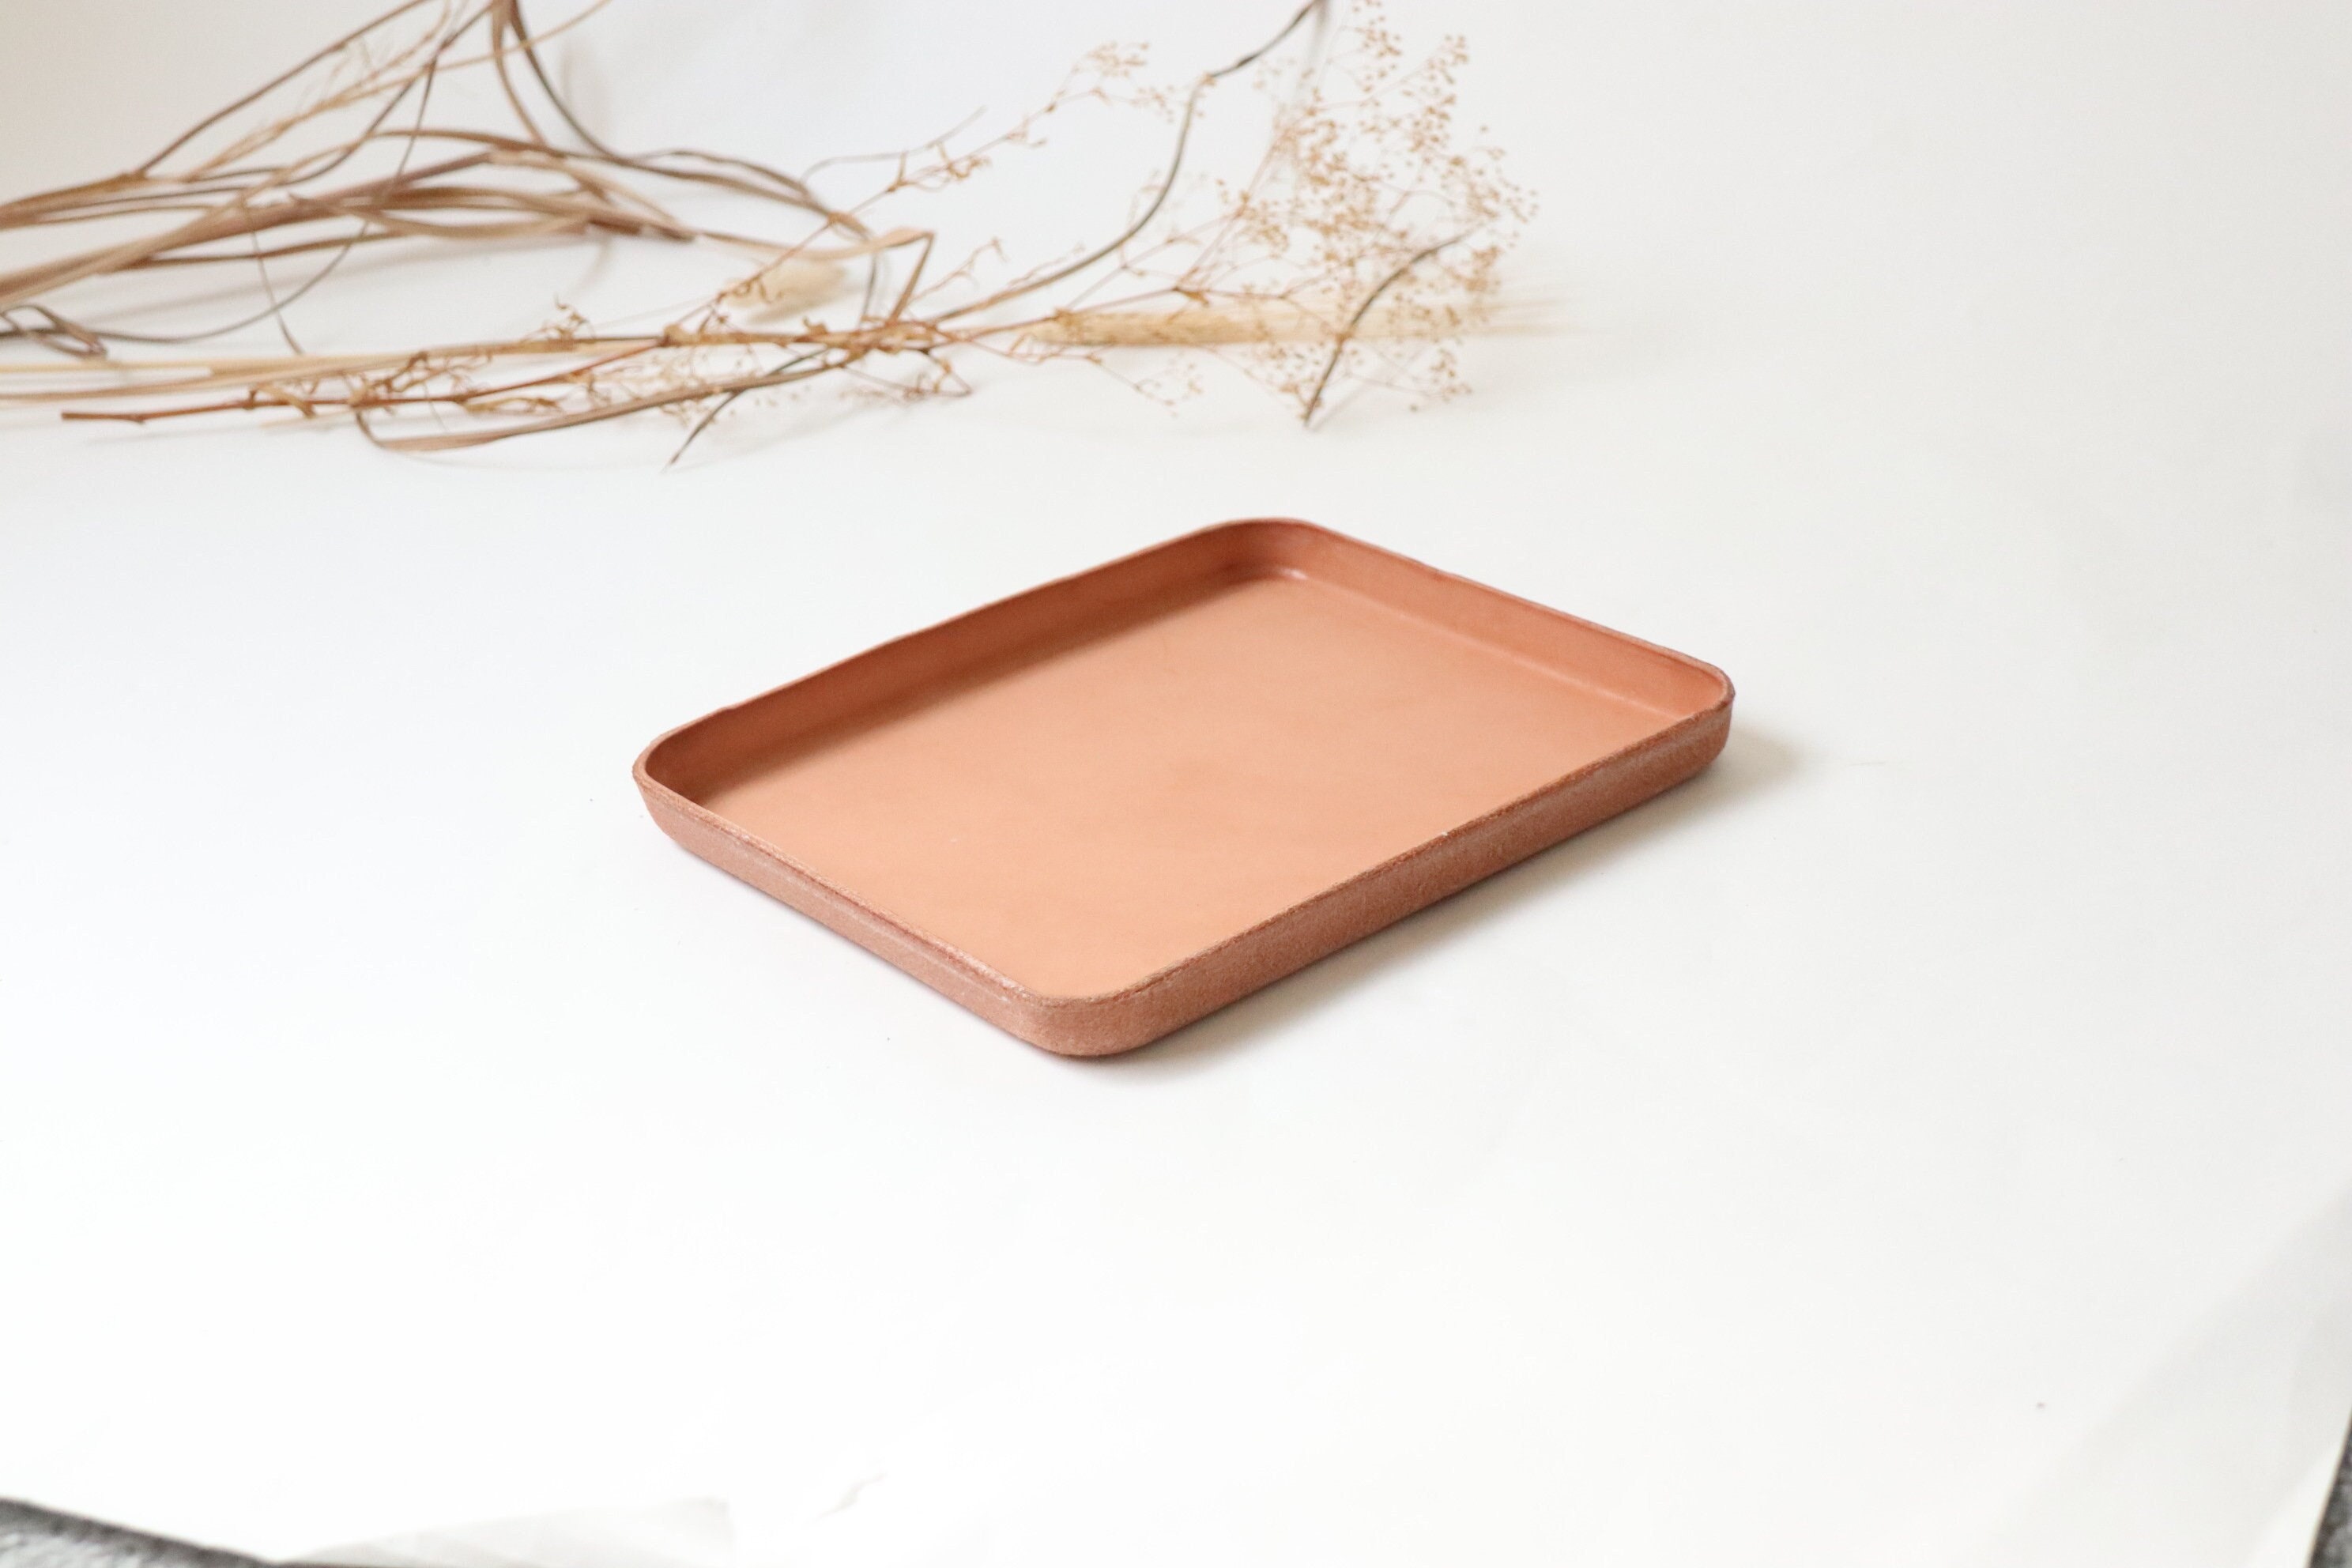 Walnut Hollow Pine & Baltic Birch Rectangle Serving Tray with